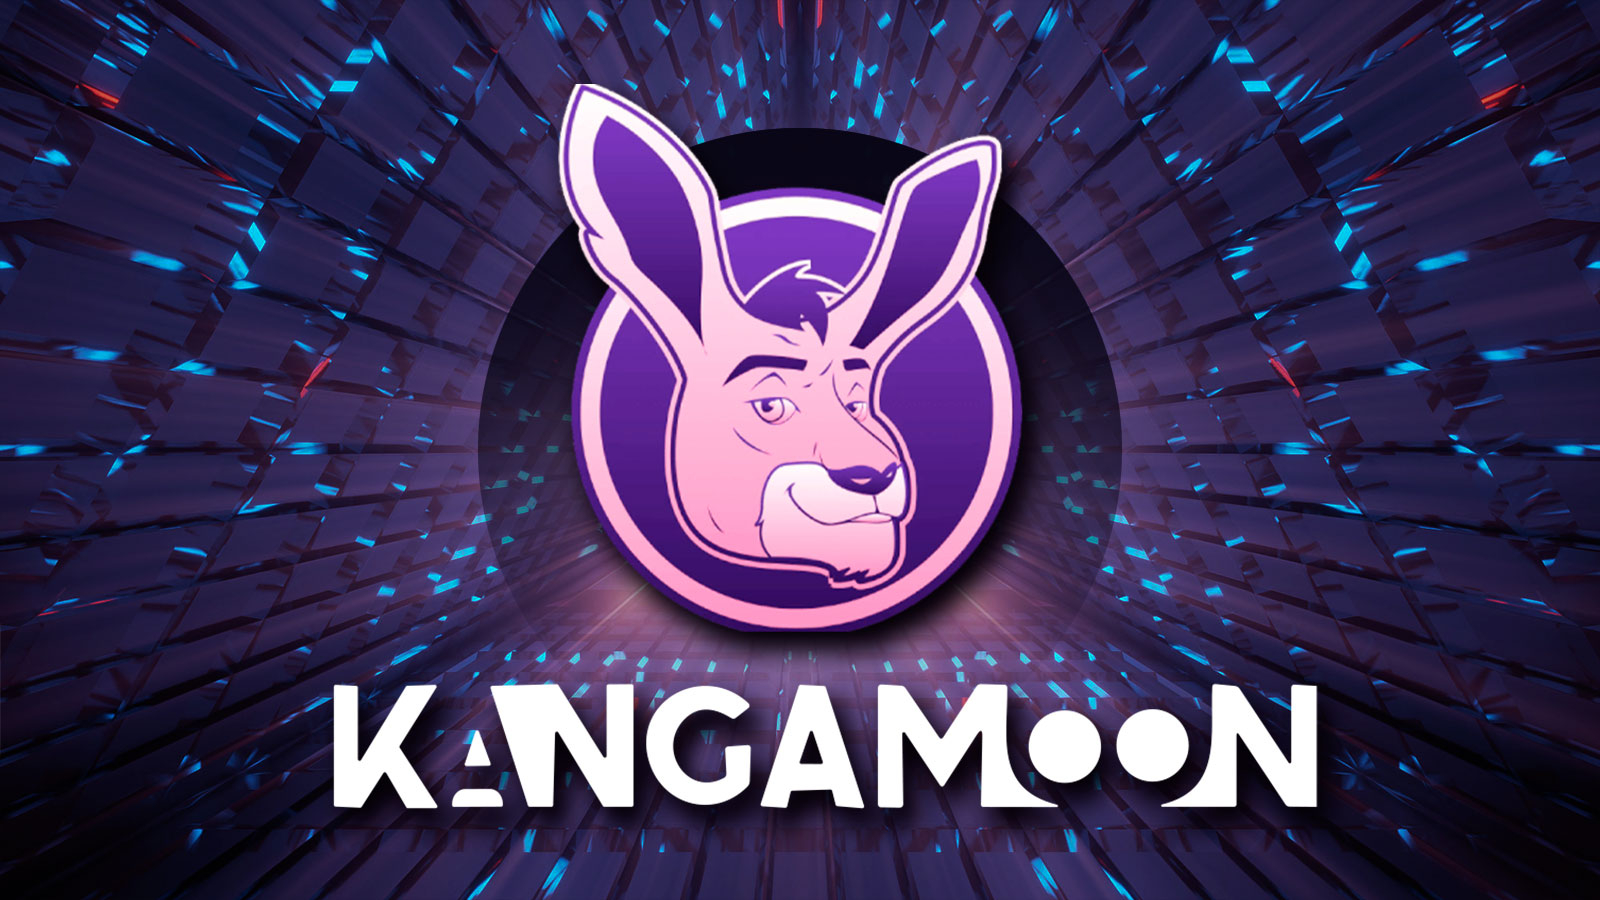 The Pre-Sale of Kangamoon Coin (KANG), Dogecoin Coin (DOGE) and Binance Coin Coin (BNB), is gaining momentum in April, as trading metrics for Dogecoin Coin (DOGE) and Binance Coin Coin (BNB), reach new highs.